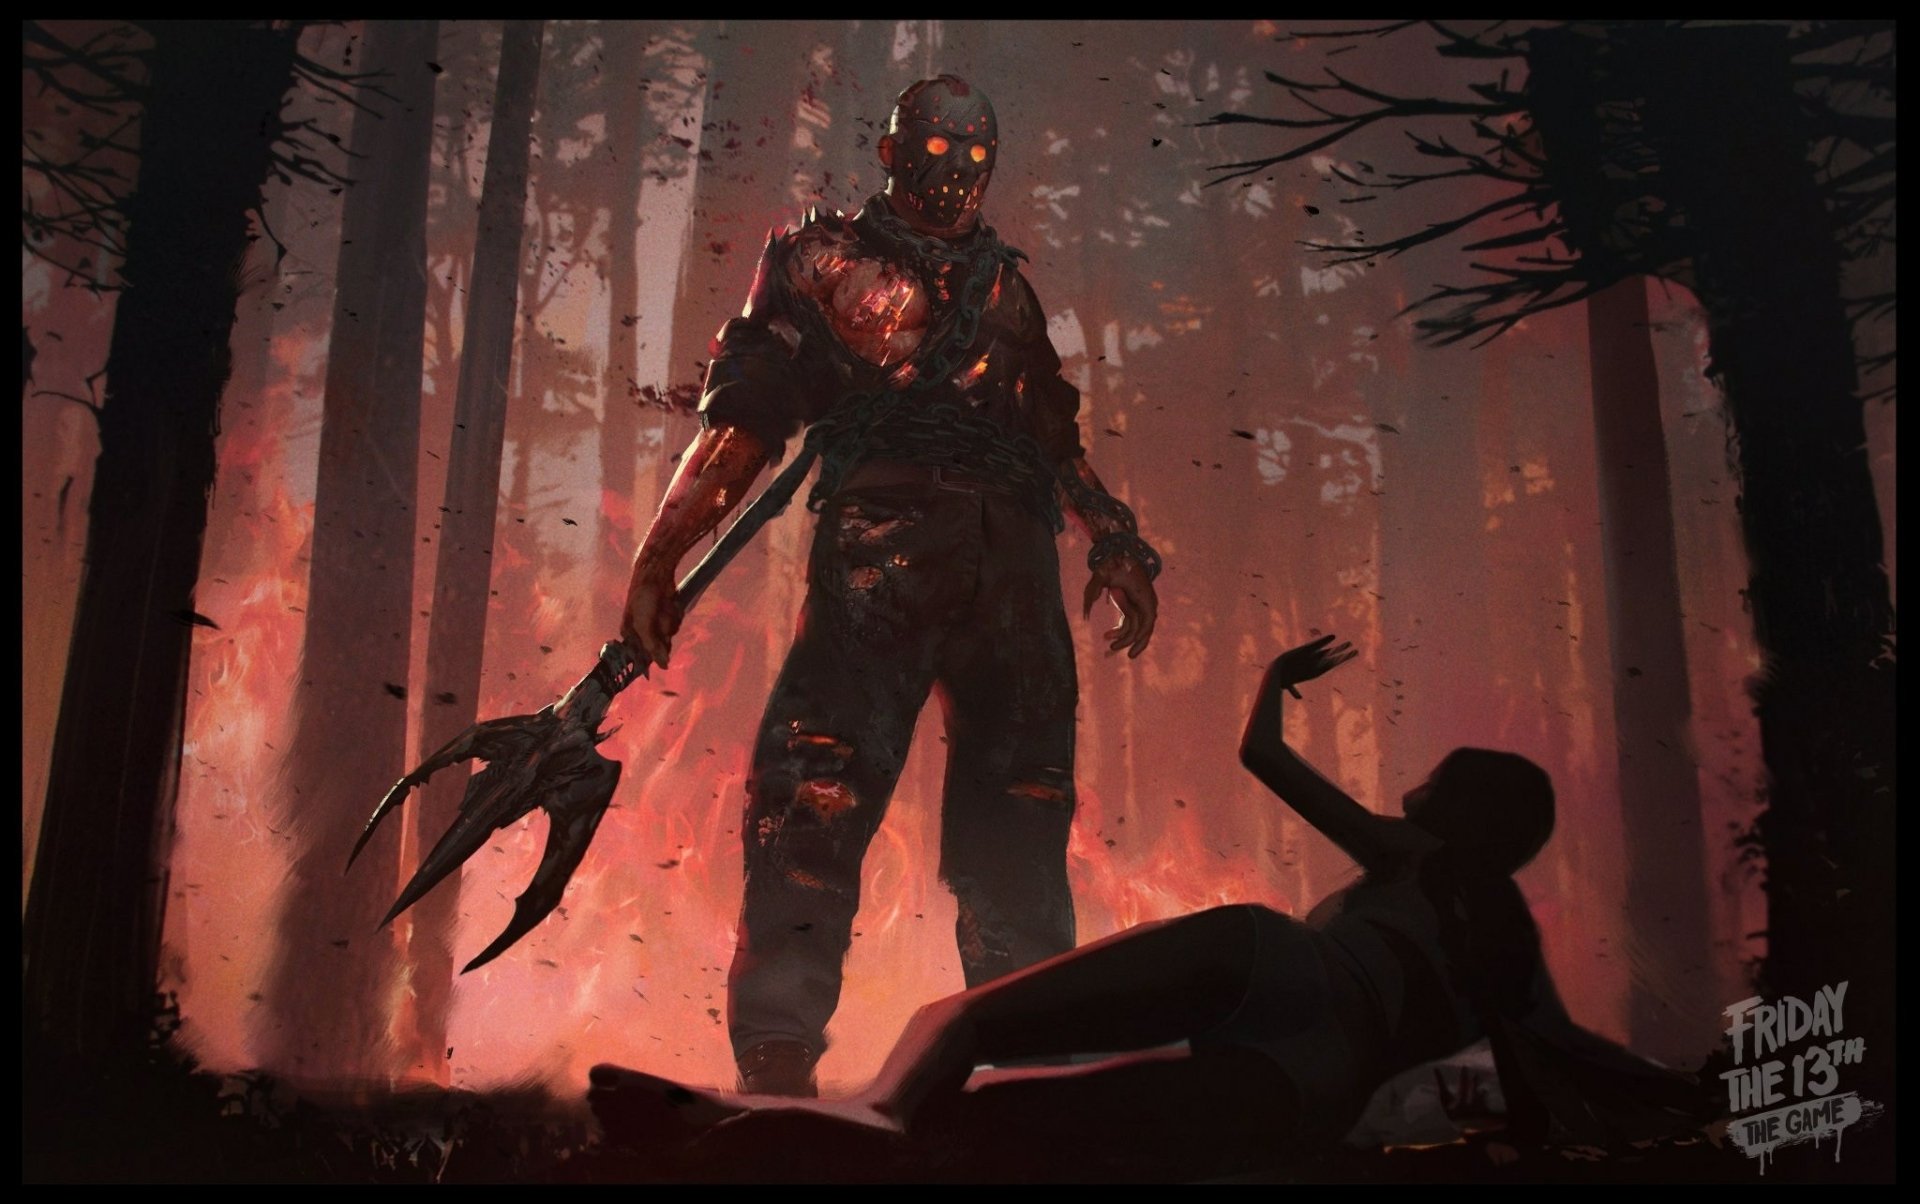 2048x1284 Friday The 13th: The Game Wallpaper Background Image. 